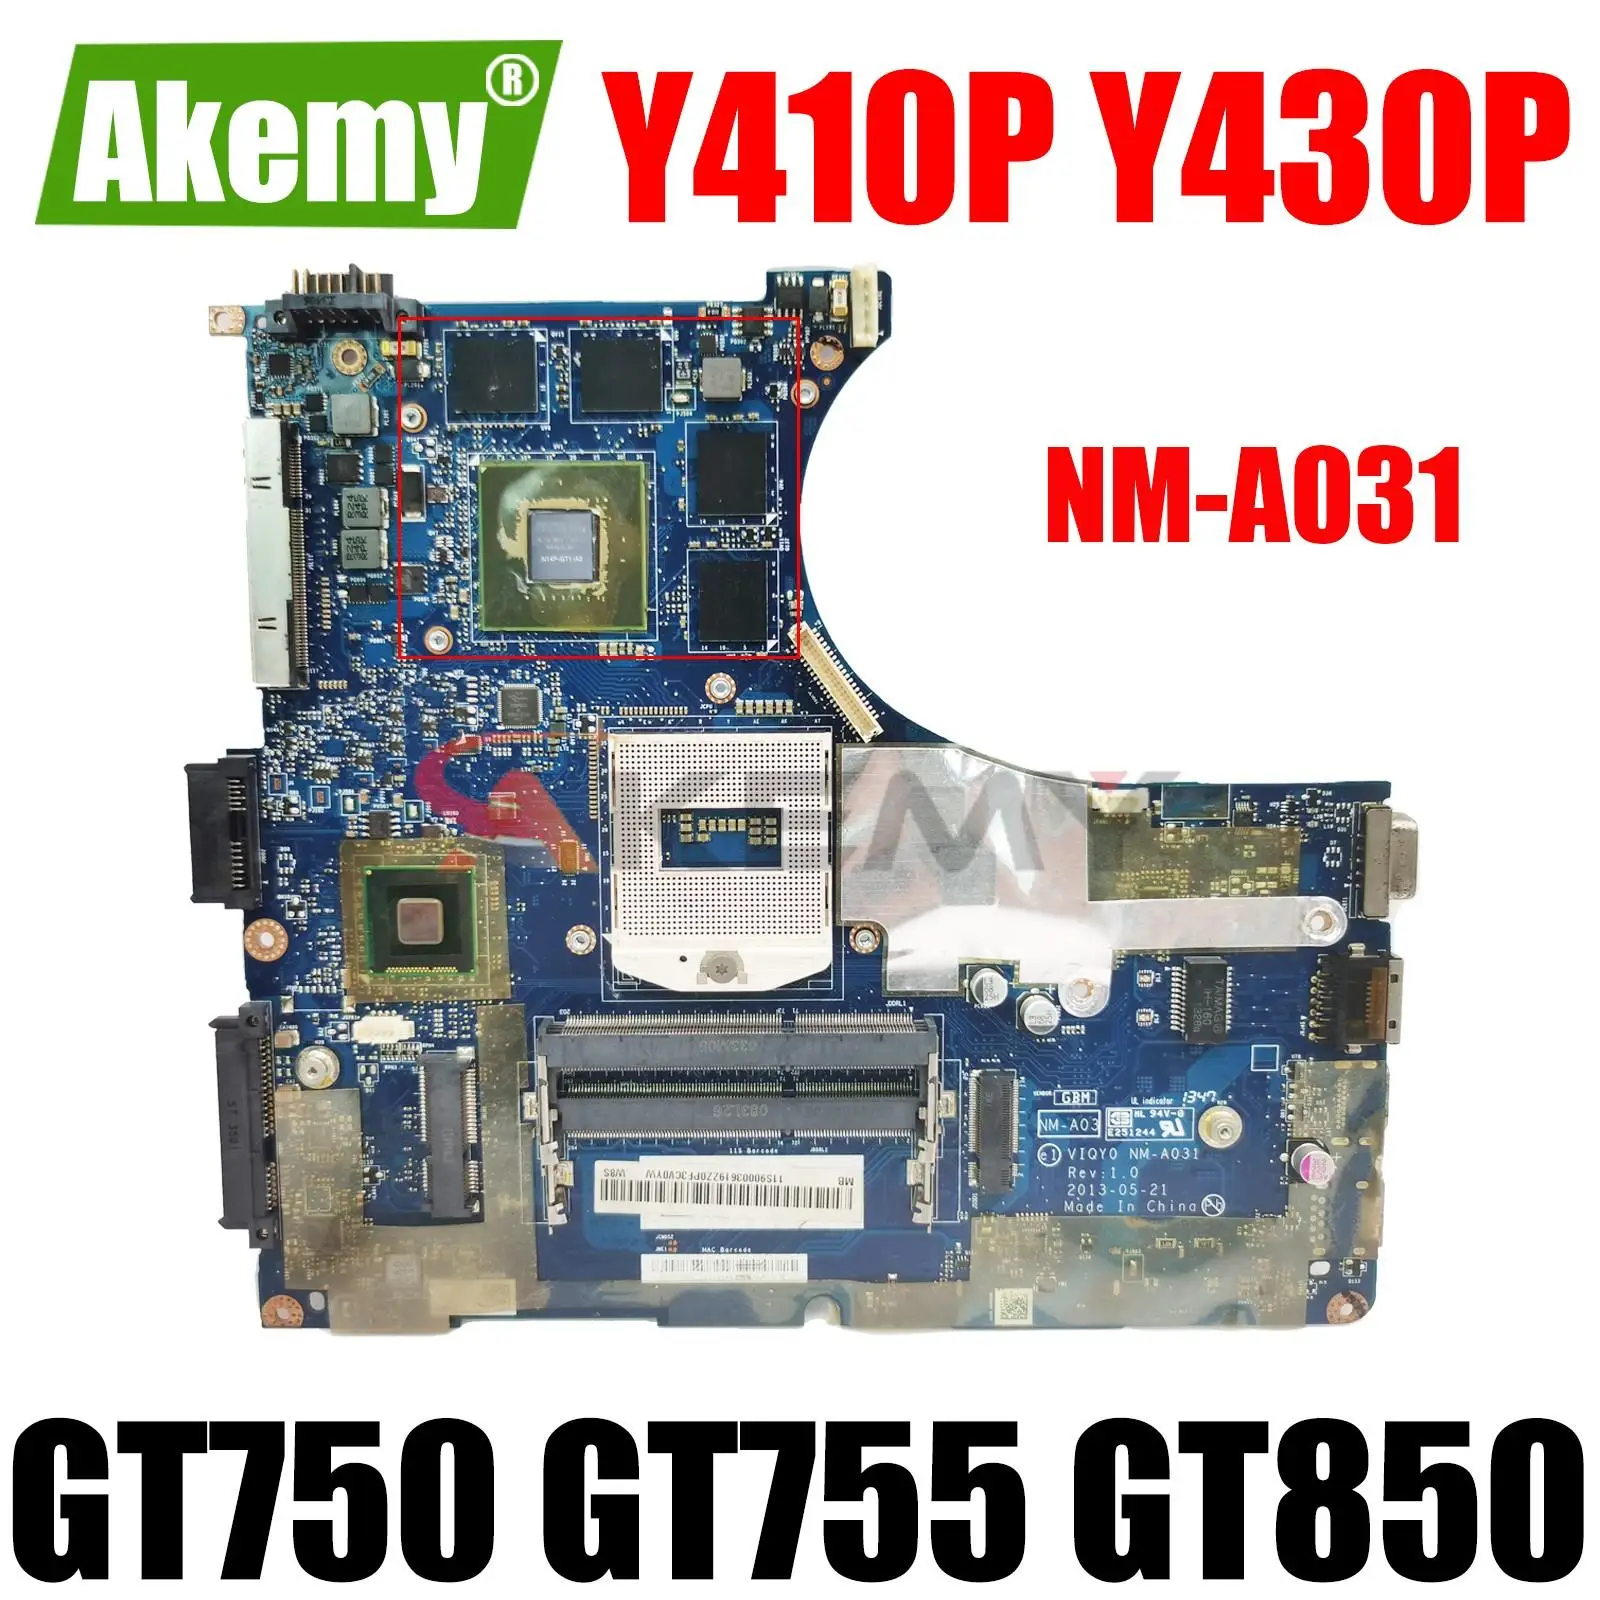 

For Lenovo Y410P Y430P Laptop Motherboard VIQY0 NM-A031 Motherboard PGA947 HM87 GPU GT750 GT755 GT850 2GB Tested 100% working